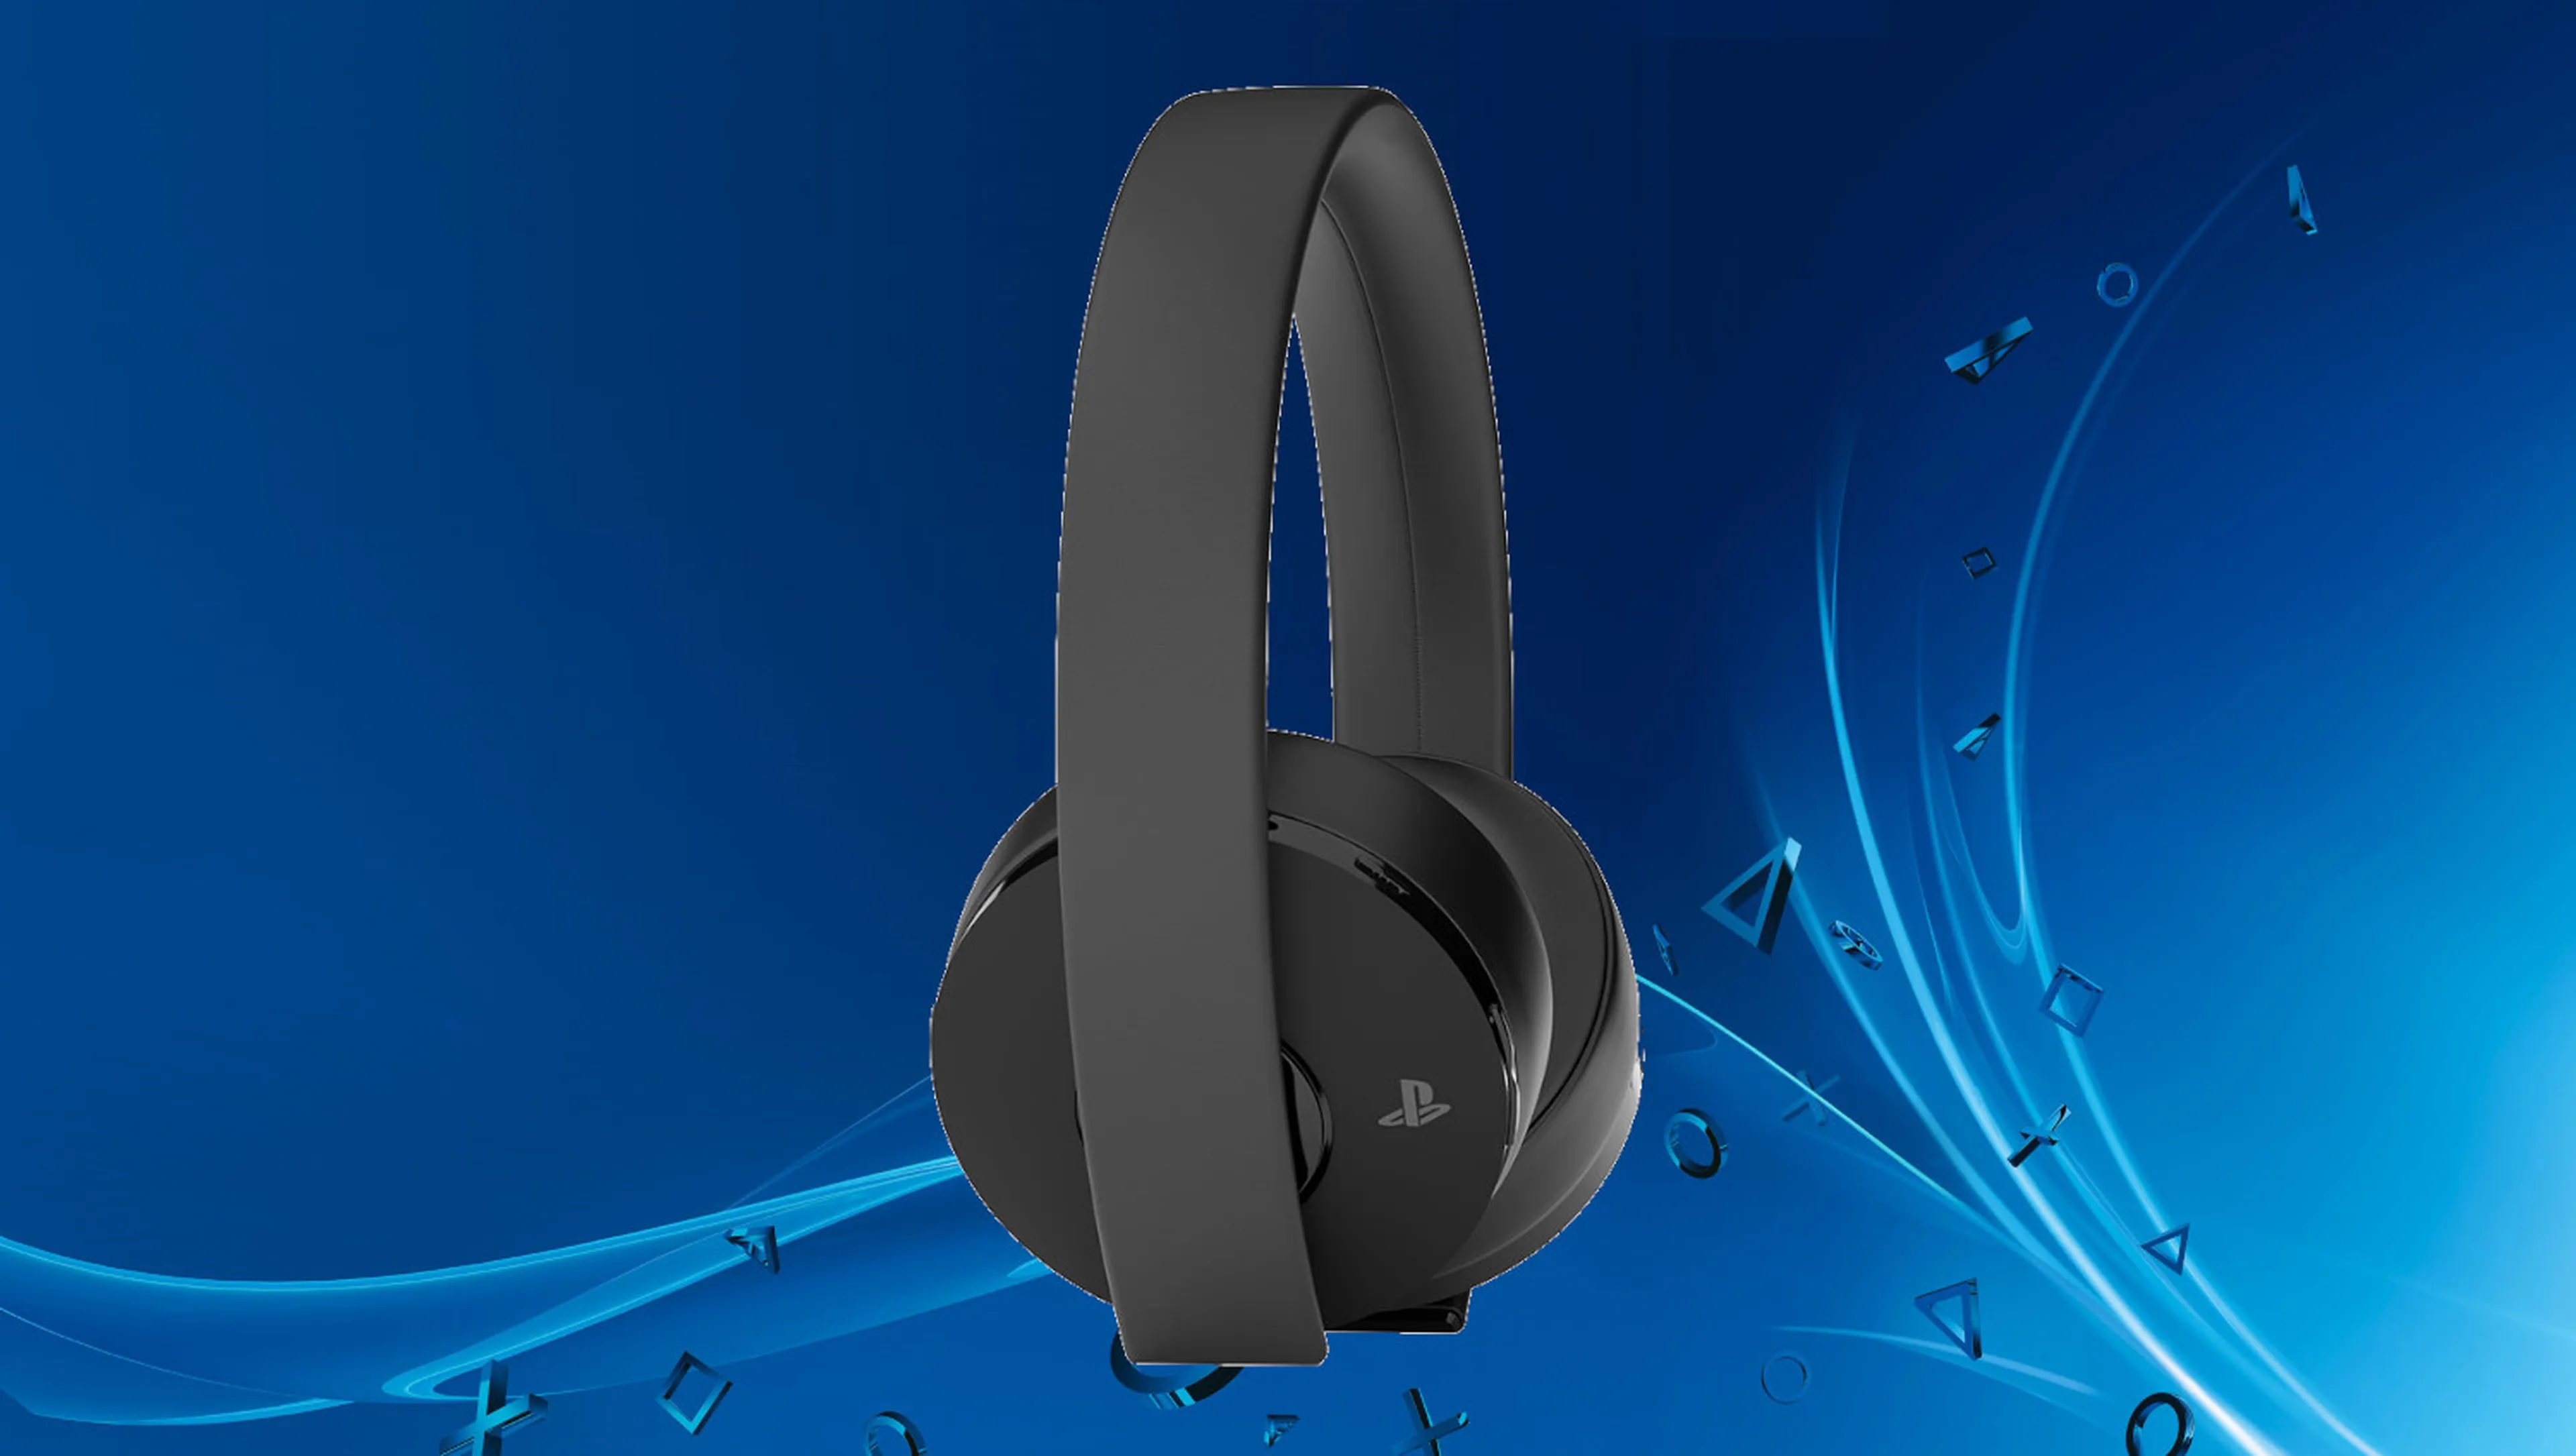 https://www.lyselectrohogar.com.ar/wp-content/uploads/2023/06/Auriculares-SONY-Gamer-Inalambricos-Gold-CUHYA0080-7.png